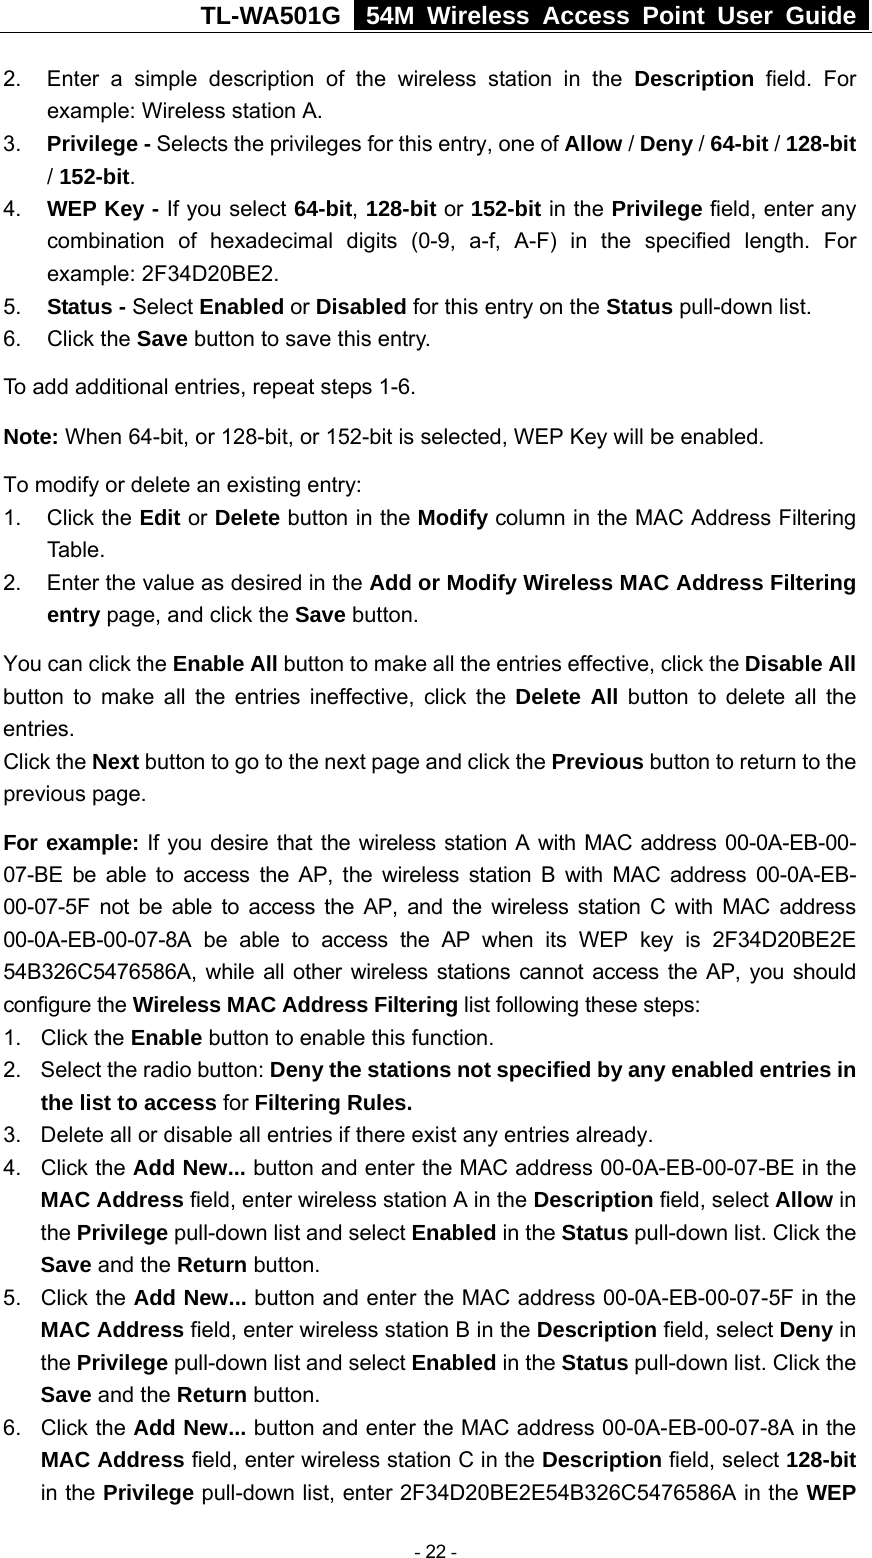 TL-WA501G   54M Wireless Access Point User Guide  2.  Enter a simple description of the wireless station in the Description field. For example: Wireless station A. 3.  Privilege - Selects the privileges for this entry, one of Allow / Deny / 64-bit / 128-bit / 152-bit.  4.  WEP Key - If you select 64-bit, 128-bit or 152-bit in the Privilege field, enter any combination of hexadecimal digits (0-9, a-f, A-F) in the specified length. For example: 2F34D20BE2.   5.  Status - Select Enabled or Disabled for this entry on the Status pull-down list. 6. Click the Save button to save this entry. To add additional entries, repeat steps 1-6. Note: When 64-bit, or 128-bit, or 152-bit is selected, WEP Key will be enabled.   To modify or delete an existing entry: 1. Click the Edit or Delete button in the Modify column in the MAC Address Filtering Table. 2.  Enter the value as desired in the Add or Modify Wireless MAC Address Filtering entry page, and click the Save button. You can click the Enable All button to make all the entries effective, click the Disable All button to make all the entries ineffective, click the Delete All button to delete all the entries. Click the Next button to go to the next page and click the Previous button to return to the previous page. For example: If you desire that the wireless station A with MAC address 00-0A-EB-00- 07-BE be able to access the AP, the wireless station B with MAC address 00-0A-EB- 00-07-5F not be able to access the AP, and the wireless station C with MAC address 00-0A-EB-00-07-8A be able to access the AP when its WEP key is 2F34D20BE2E 54B326C5476586A, while all other wireless stations cannot access the AP, you should configure the Wireless MAC Address Filtering list following these steps: 1. Click the Enable button to enable this function. 2.  Select the radio button: Deny the stations not specified by any enabled entries in the list to access for Filtering Rules. 3.  Delete all or disable all entries if there exist any entries already. 4. Click the Add New... button and enter the MAC address 00-0A-EB-00-07-BE in the MAC Address field, enter wireless station A in the Description field, select Allow in the Privilege pull-down list and select Enabled in the Status pull-down list. Click the Save and the Return button. 5. Click the Add New... button and enter the MAC address 00-0A-EB-00-07-5F in the MAC Address field, enter wireless station B in the Description field, select Deny in the Privilege pull-down list and select Enabled in the Status pull-down list. Click the Save and the Return button. 6. Click the Add New... button and enter the MAC address 00-0A-EB-00-07-8A in the MAC Address field, enter wireless station C in the Description field, select 128-bit in the Privilege pull-down list, enter 2F34D20BE2E54B326C5476586A in the WEP  - 22 - 